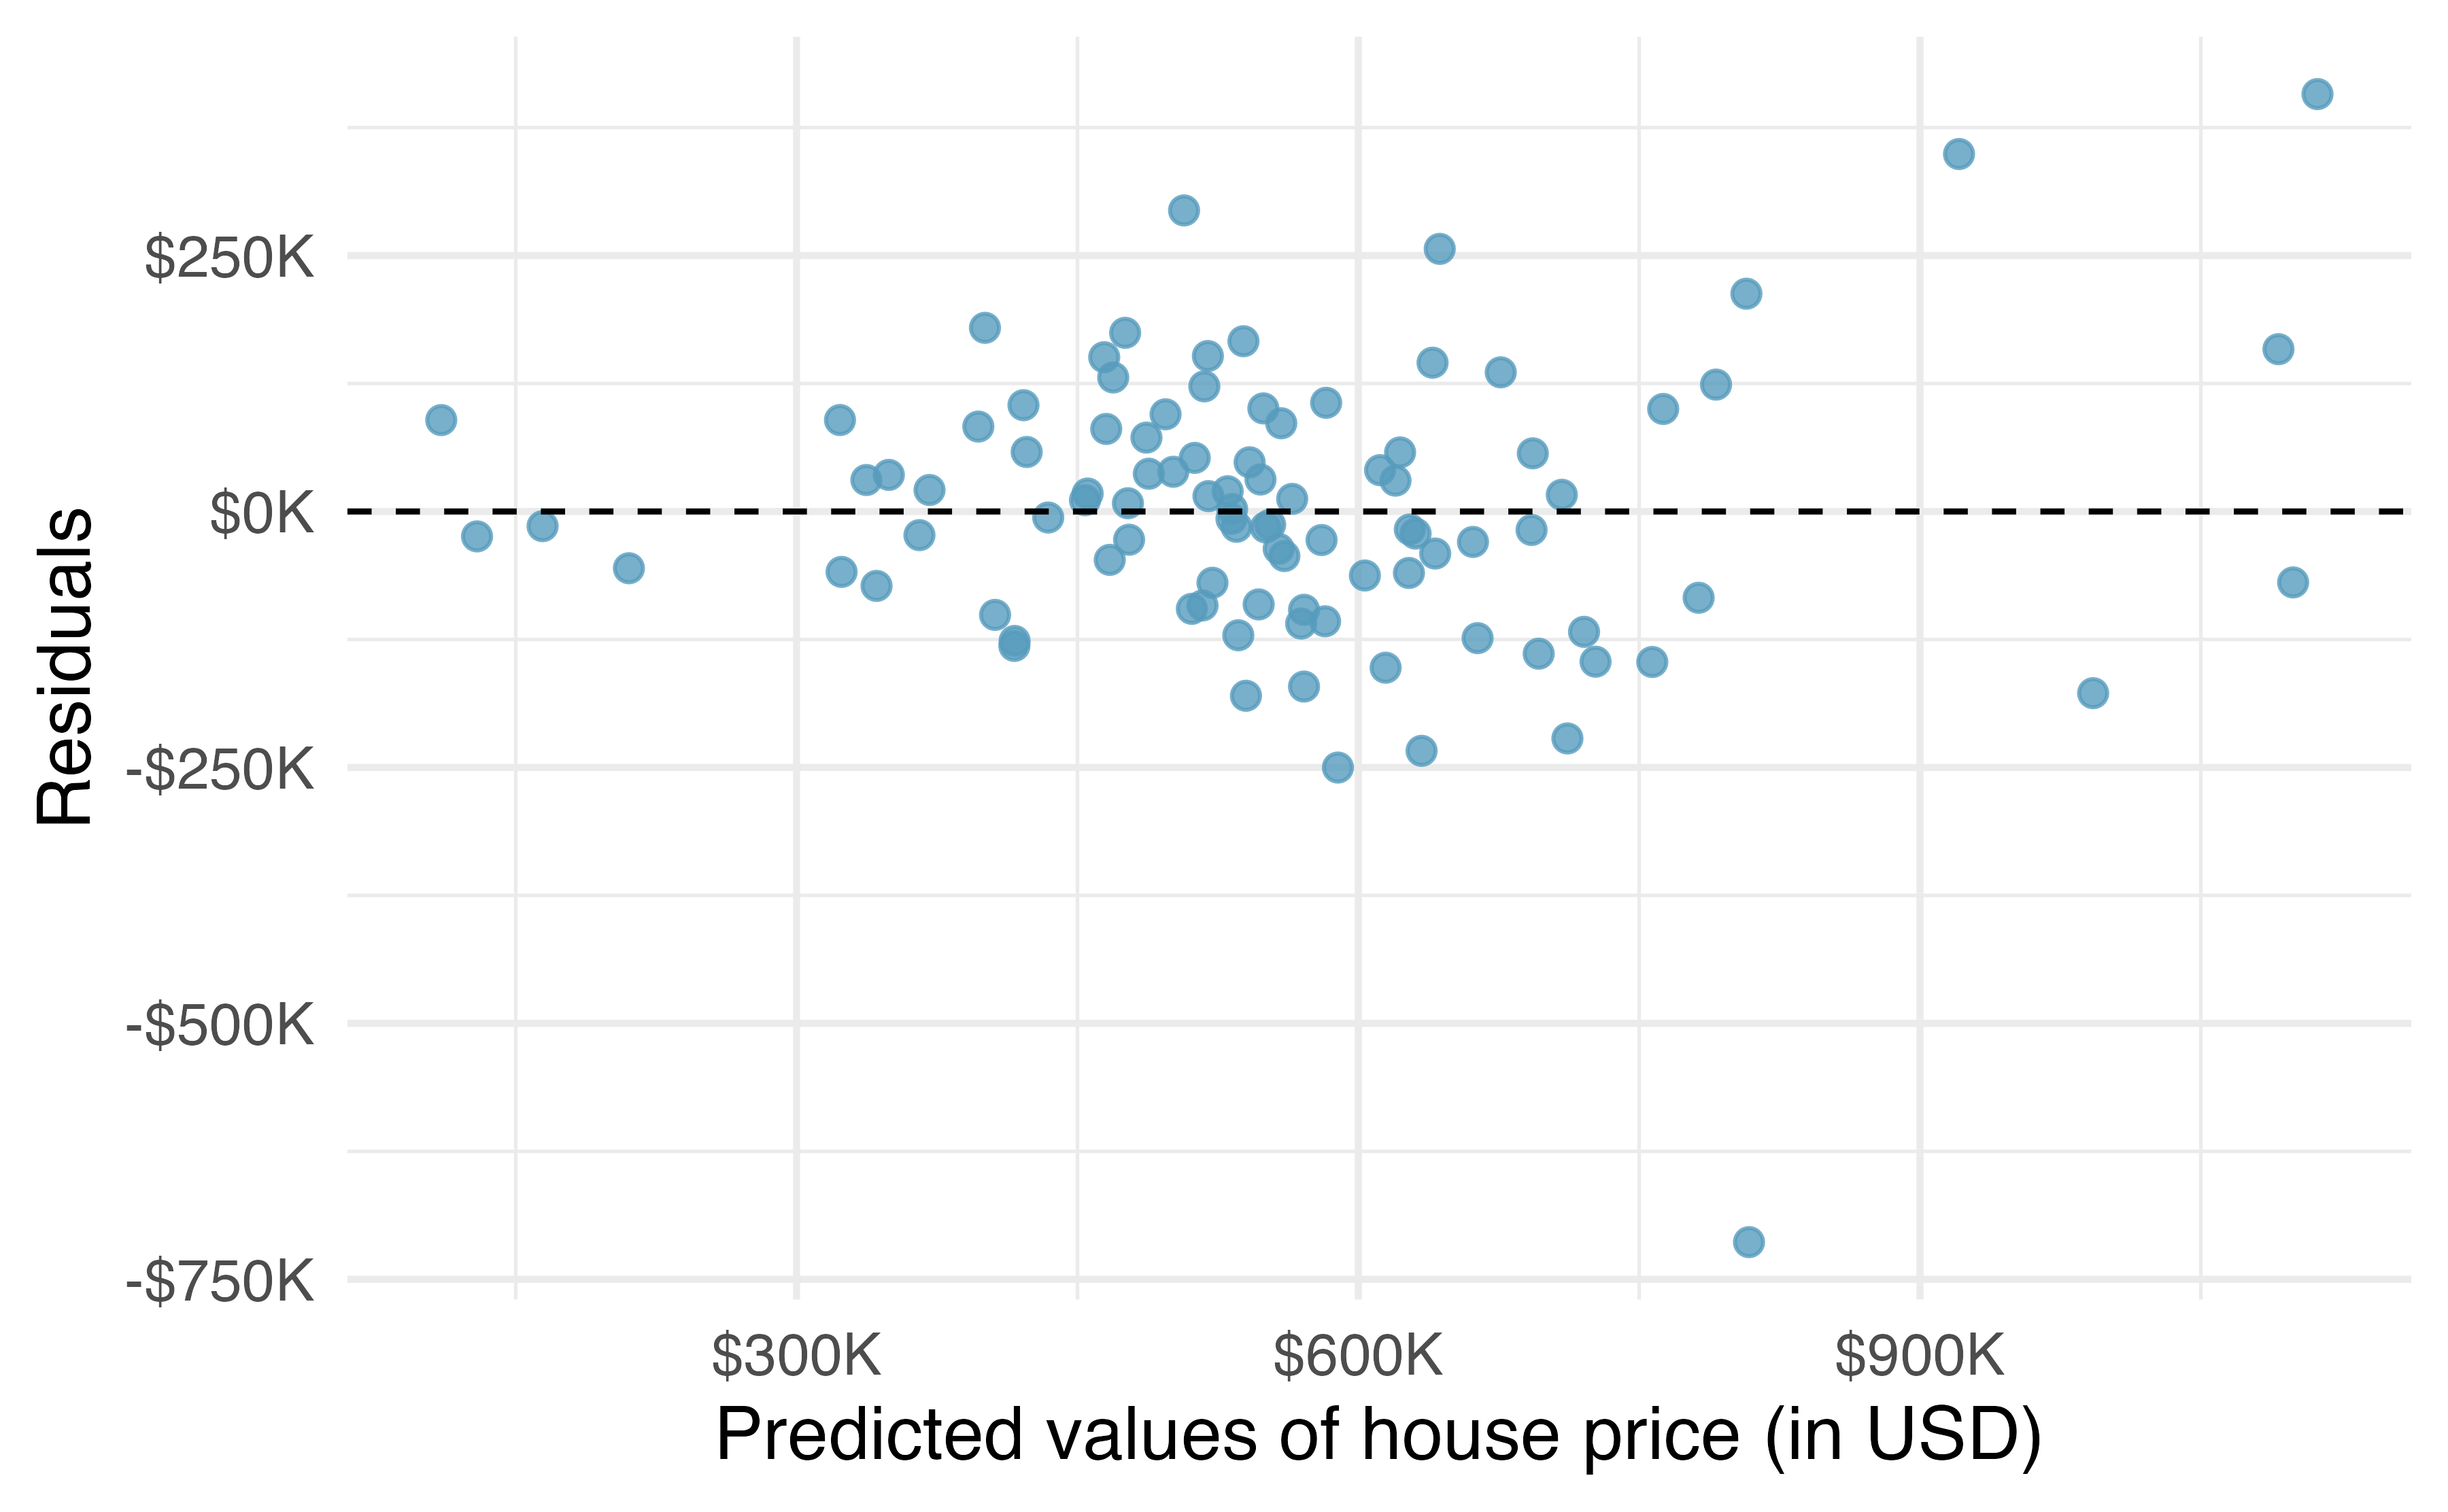 Residuals versus predicted values for the model predicting sale price from all predictors except for number of bedrooms.